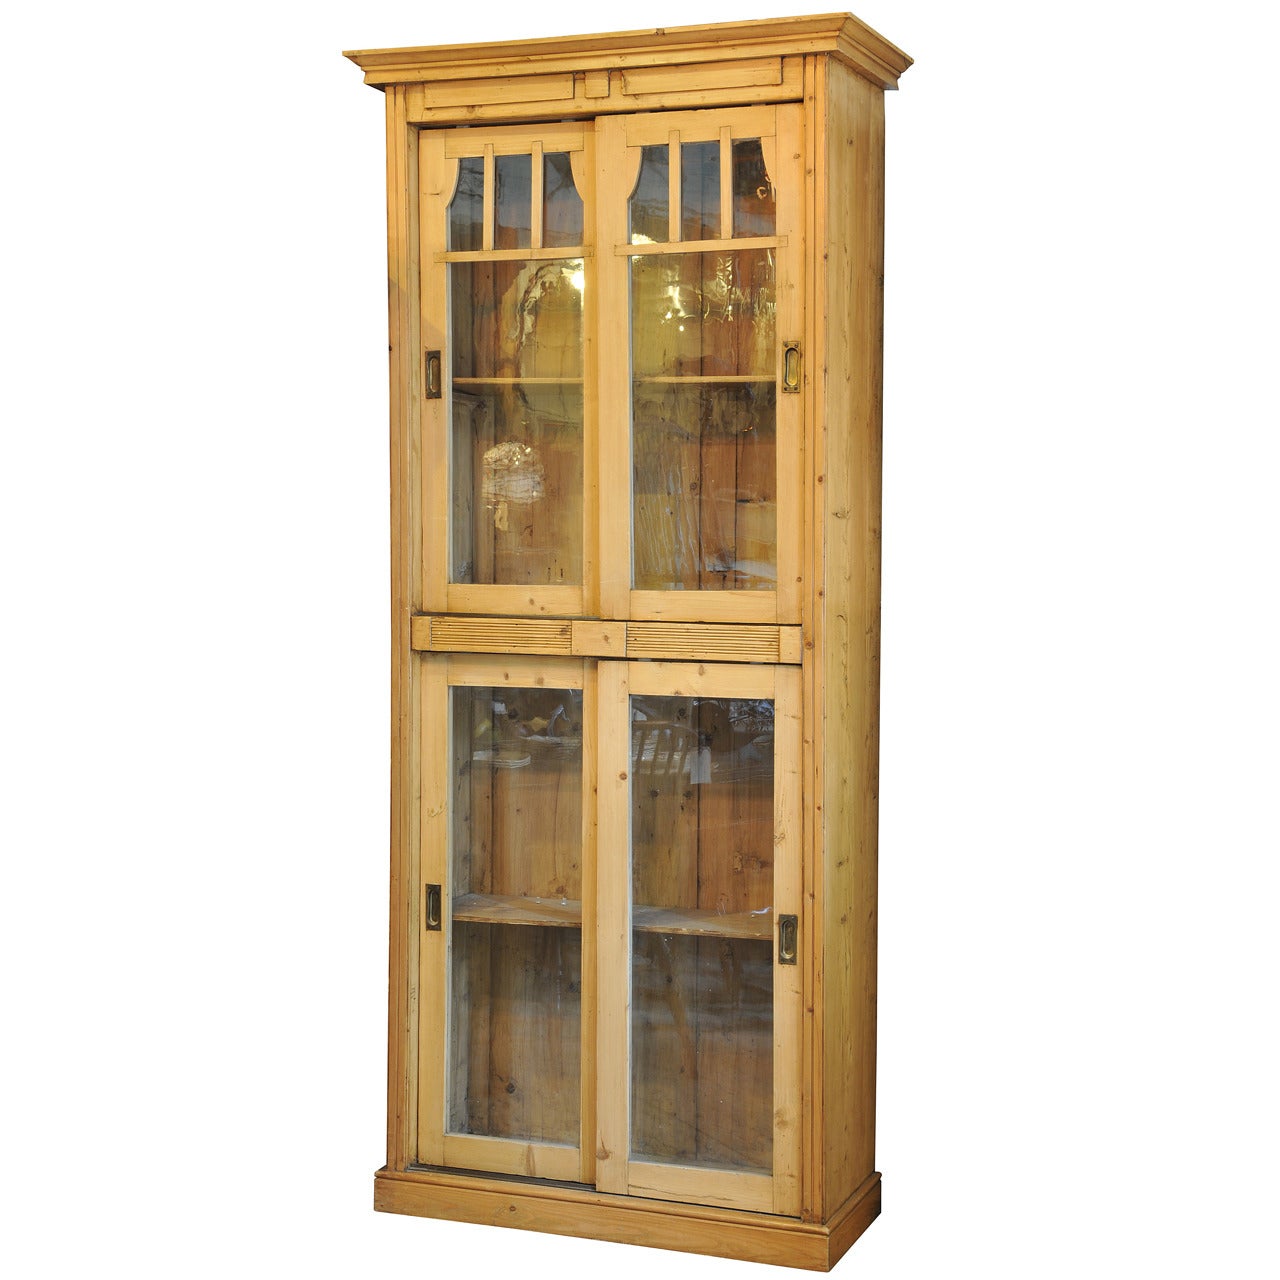 Tall Antique Pine Pantry Cupboard